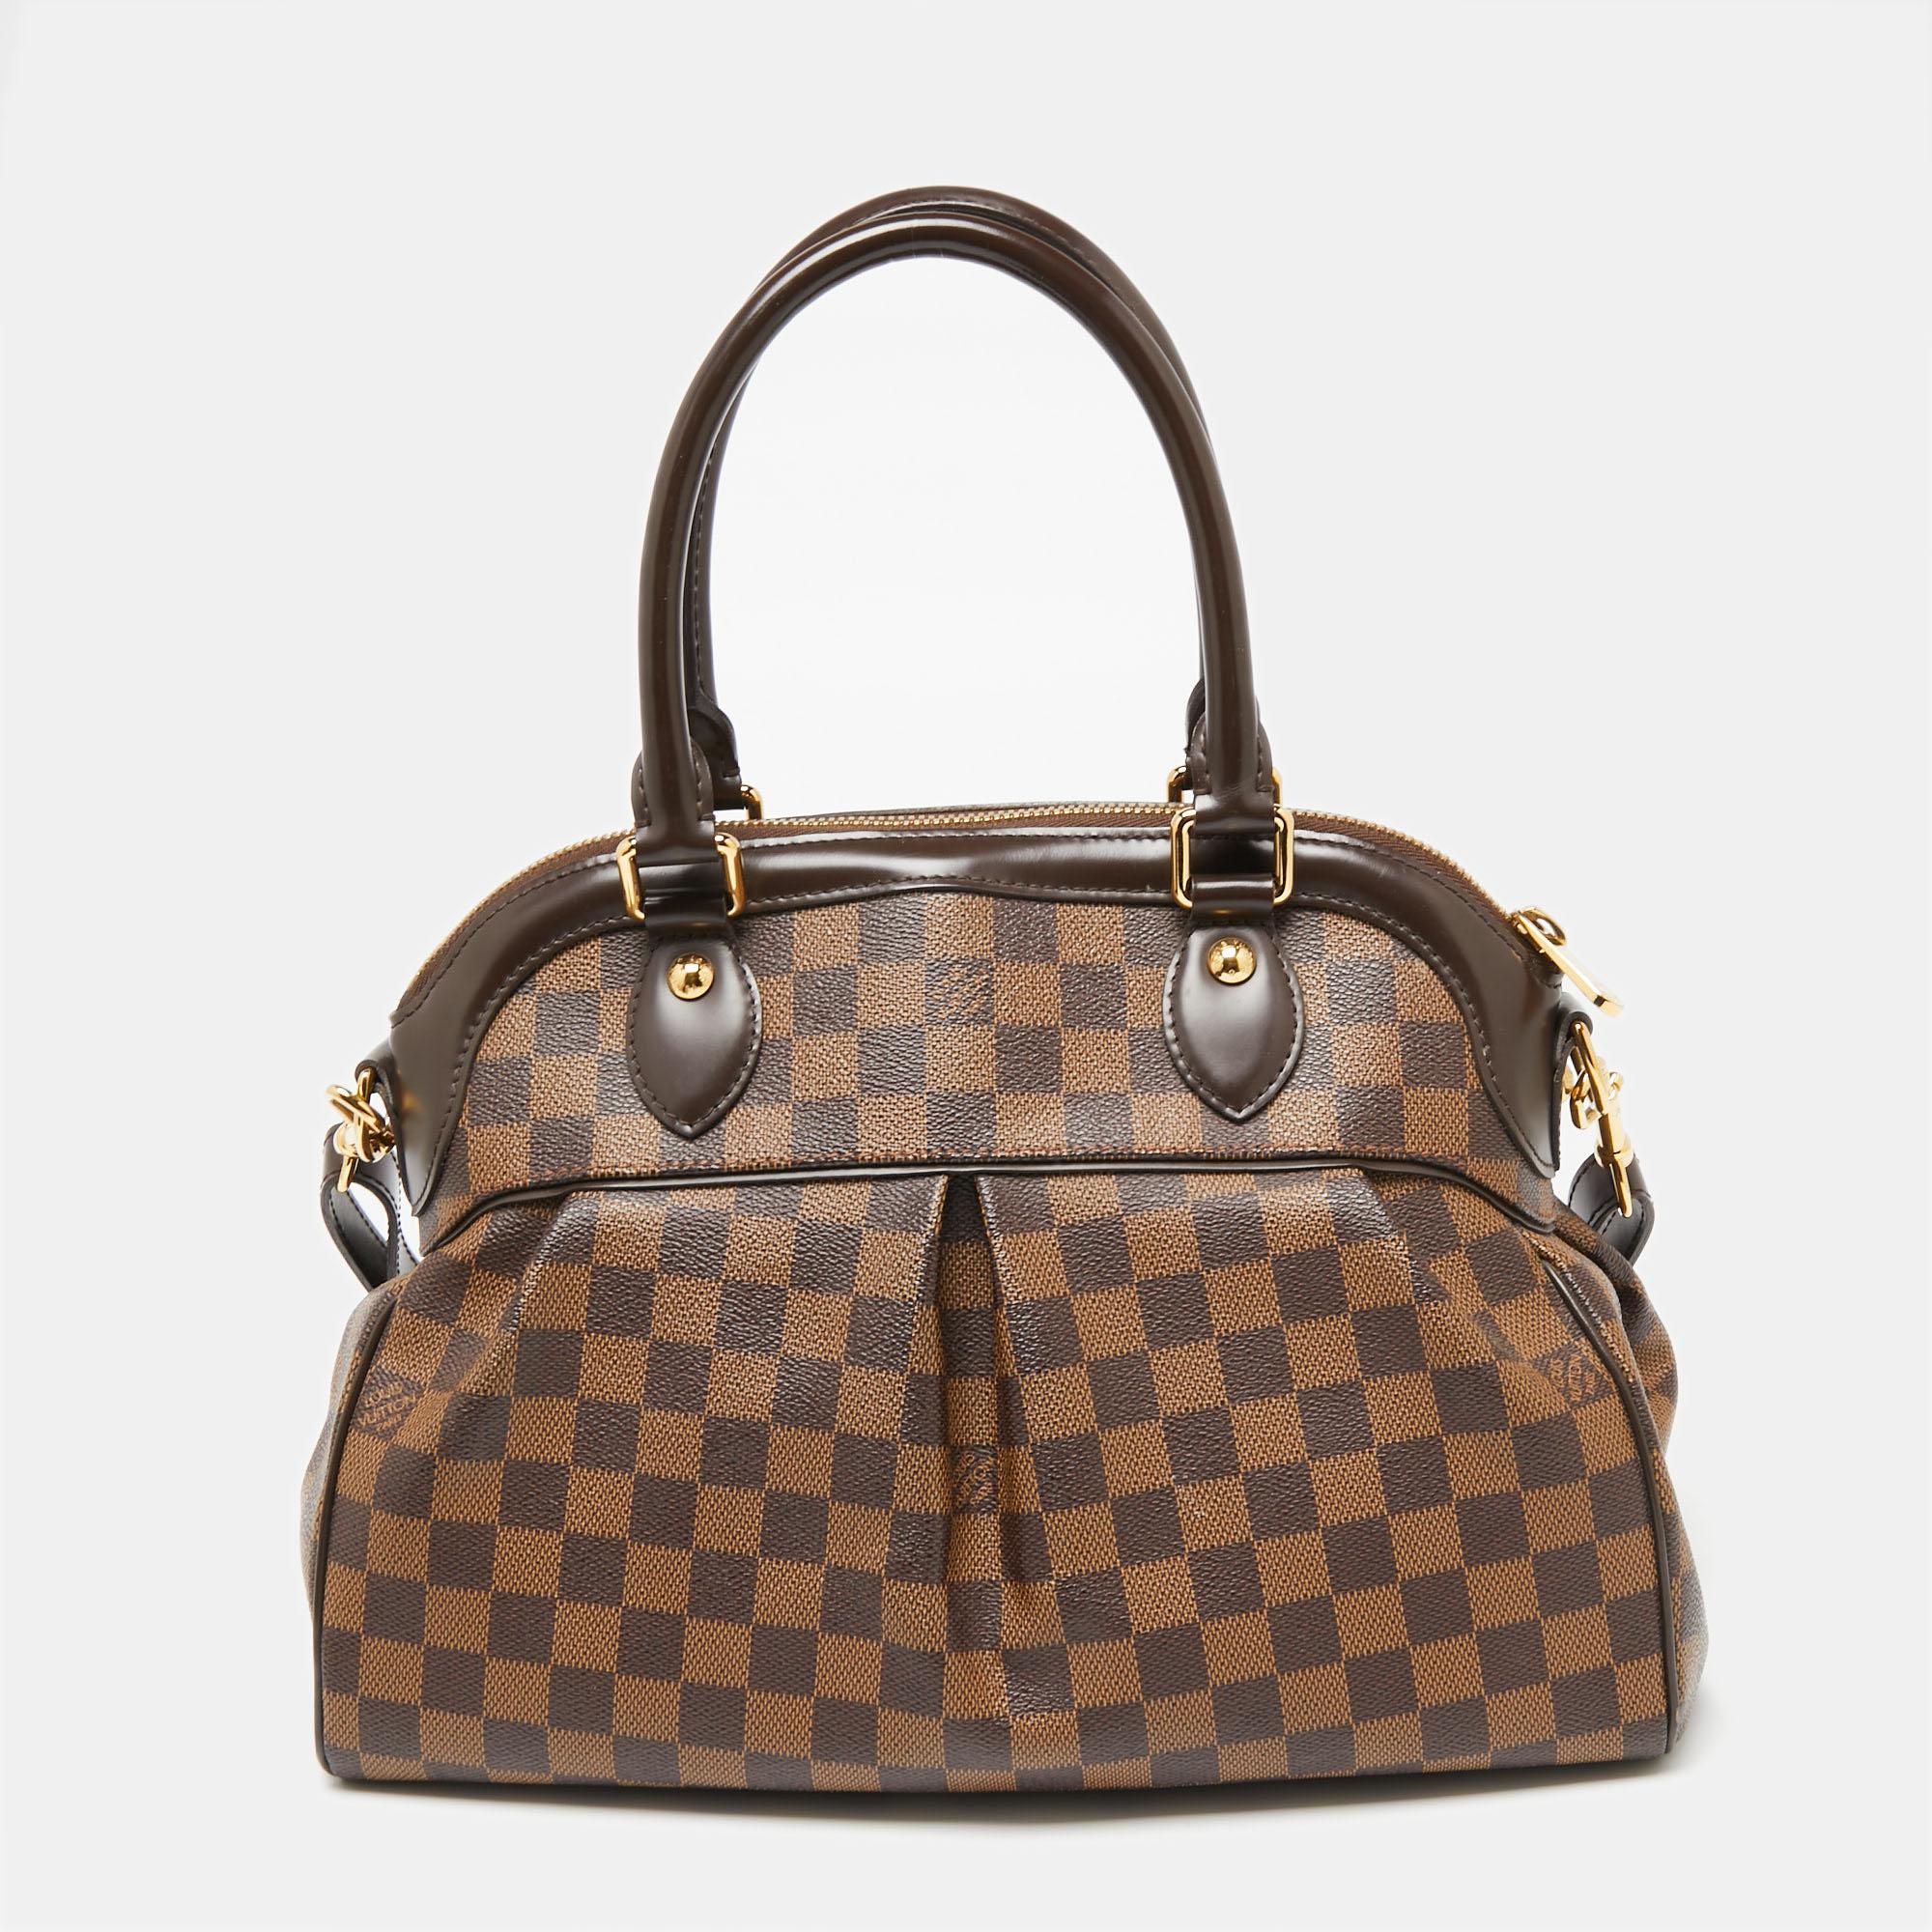 This Louis Vuitton PM bag will be one of your favorite everyday accessories. Expertly made from Damier Ebene canvas and leather trims, it features dual handles, zipper closure at the top, and a shoulder strap. The spaciously sized Alcantara-lined